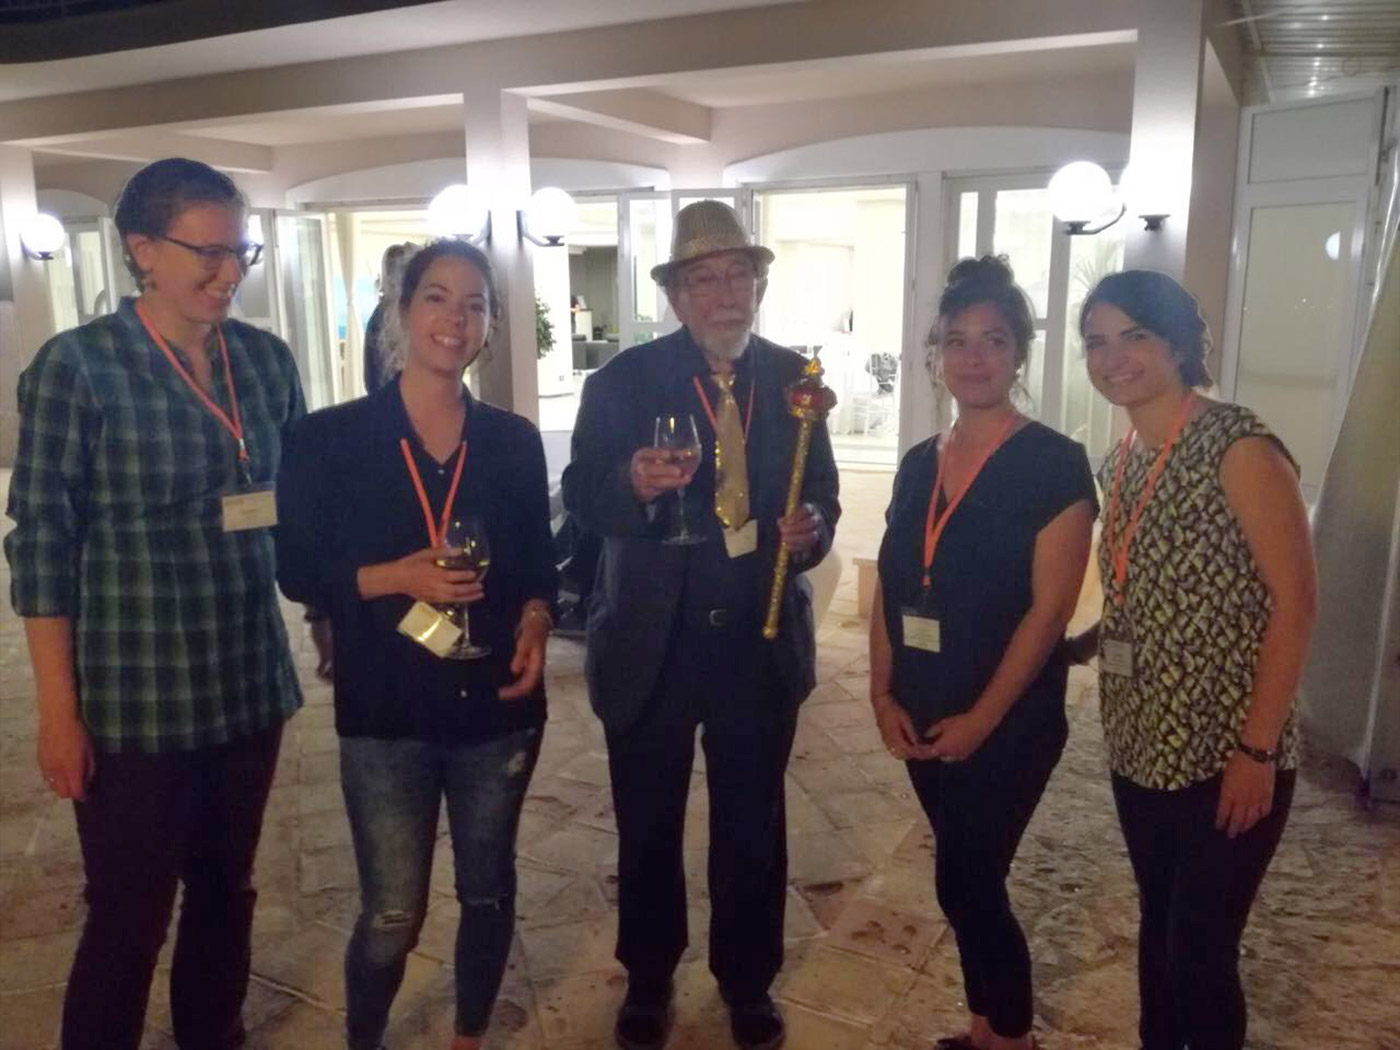 Cecile Exertier and Matilde Trabuco with Professor Sir Tom Blundell director of the Erice International Crystallography School